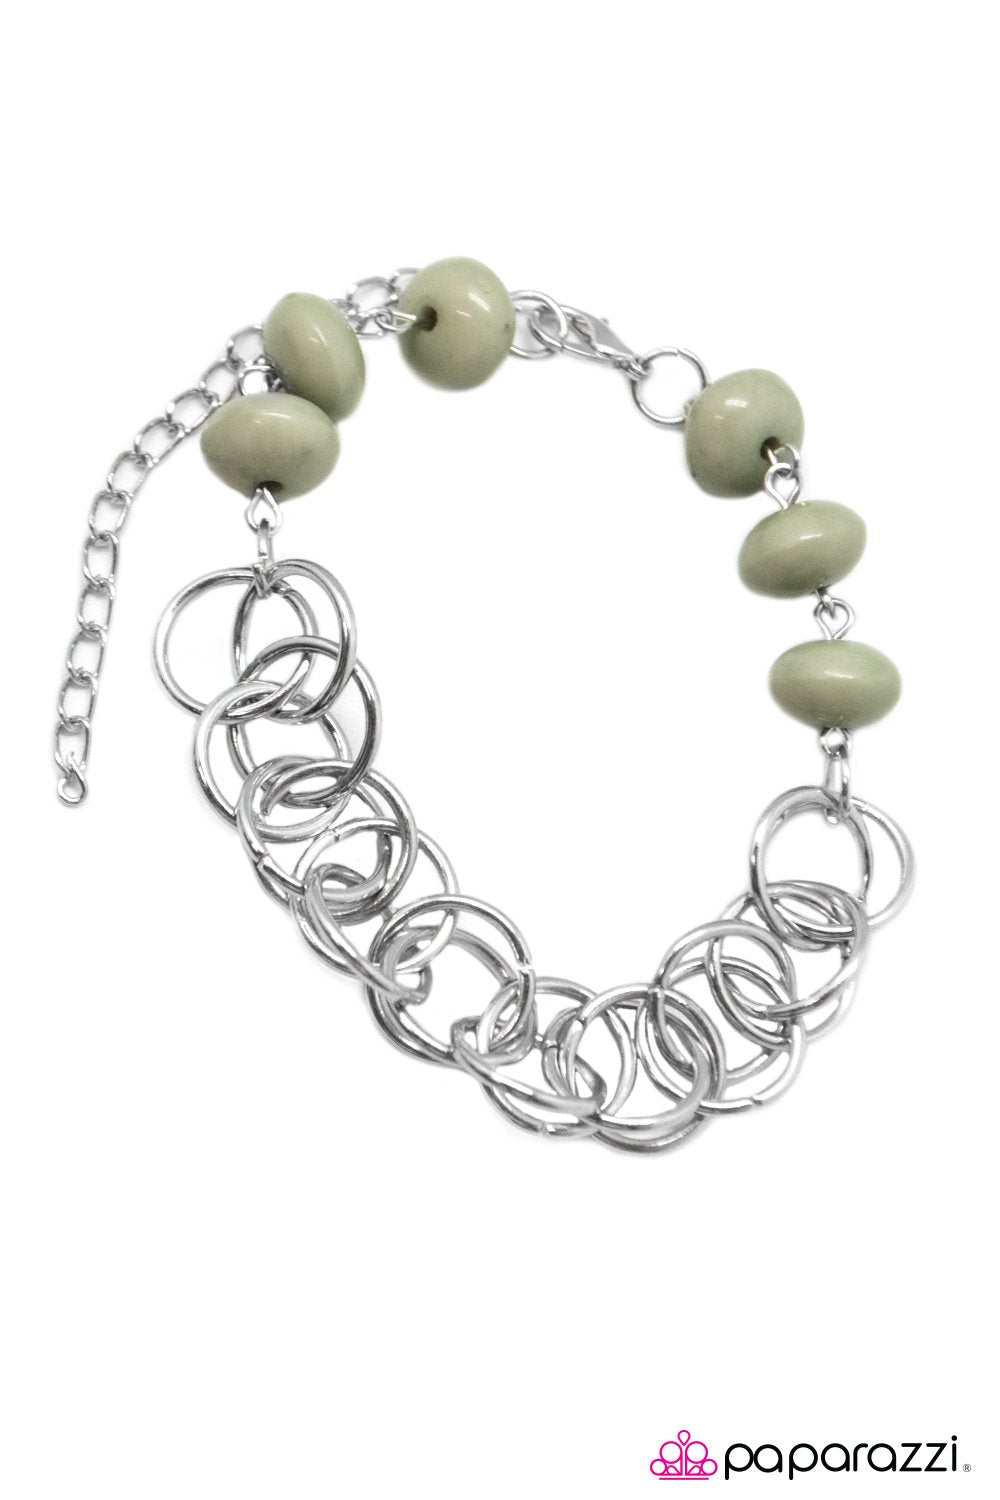 Divinely Divine Sage Green Bracelet - Paparazzi Accessories-CarasShop.com - $5 Jewelry by Cara Jewels